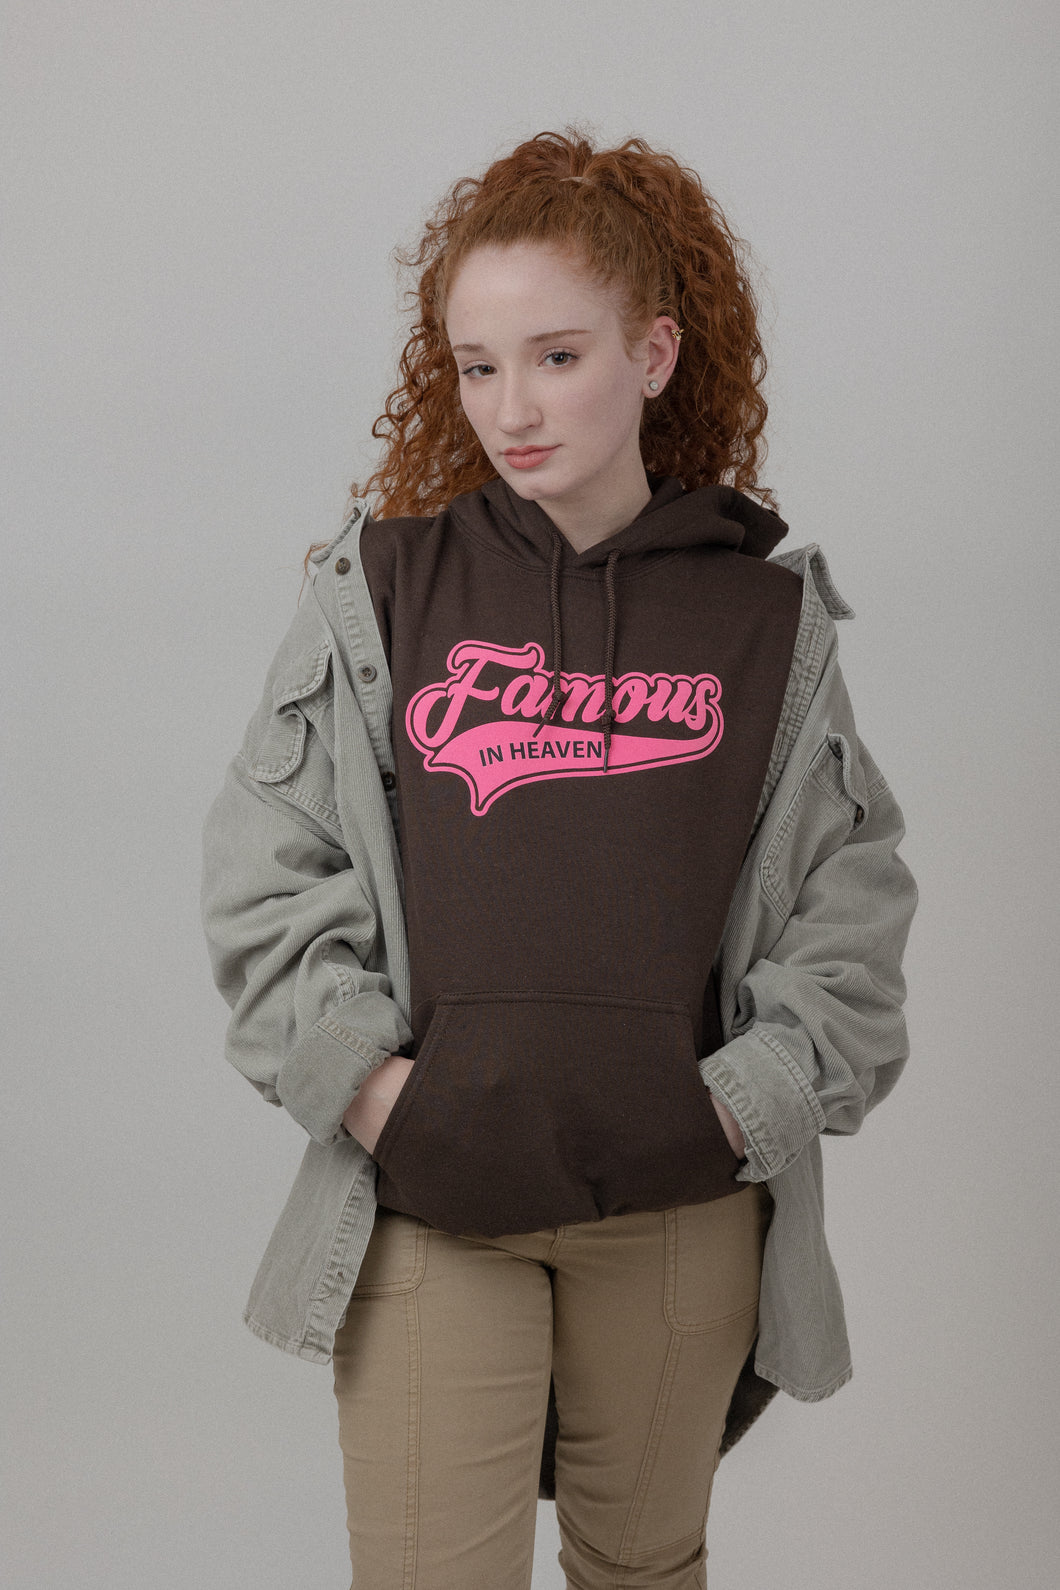 Famous in Heaven - All Star Hoodie (Chocolate/Pink)